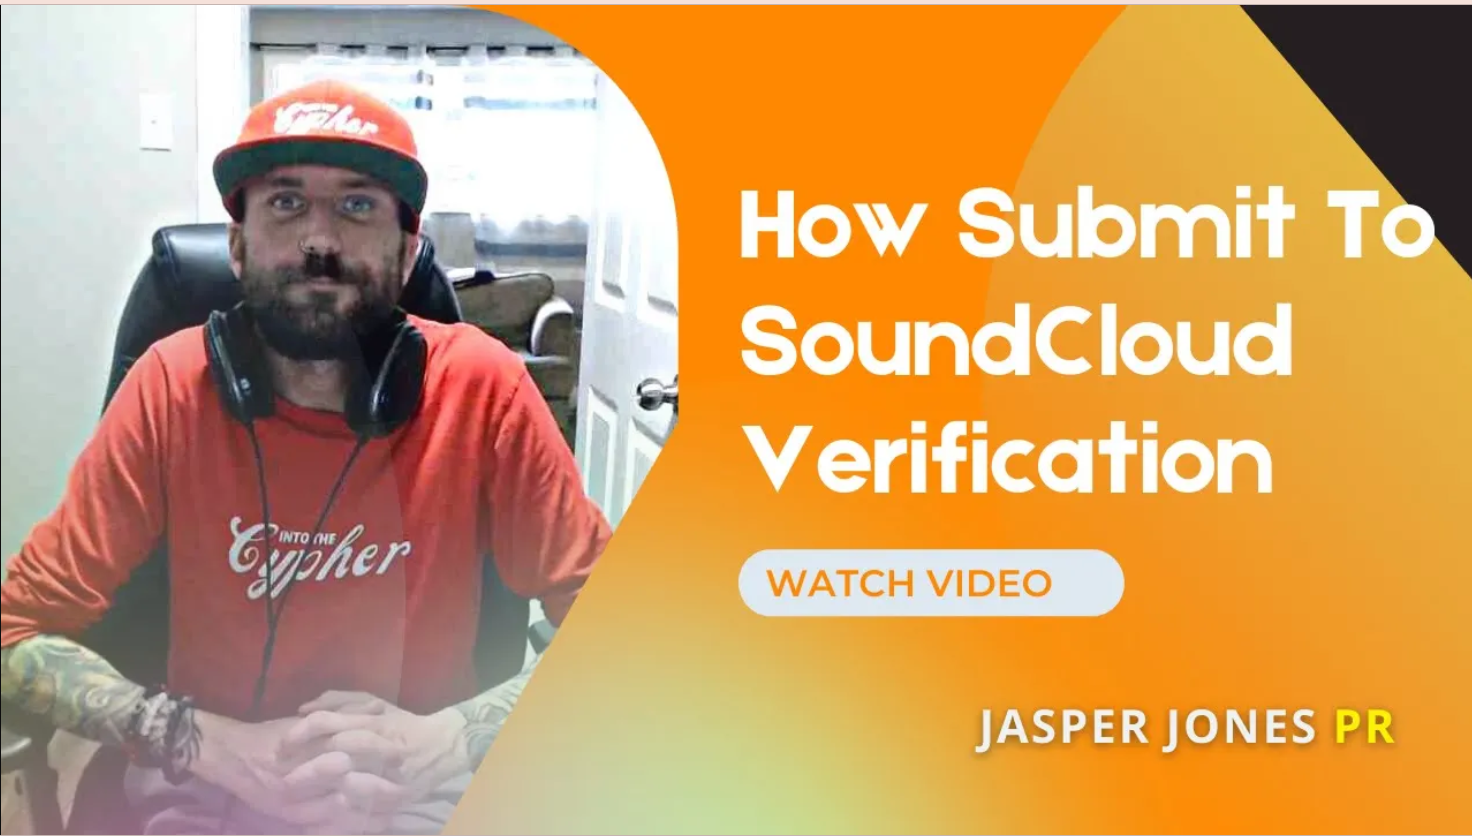 How to Submit To SoundCloud For Verification